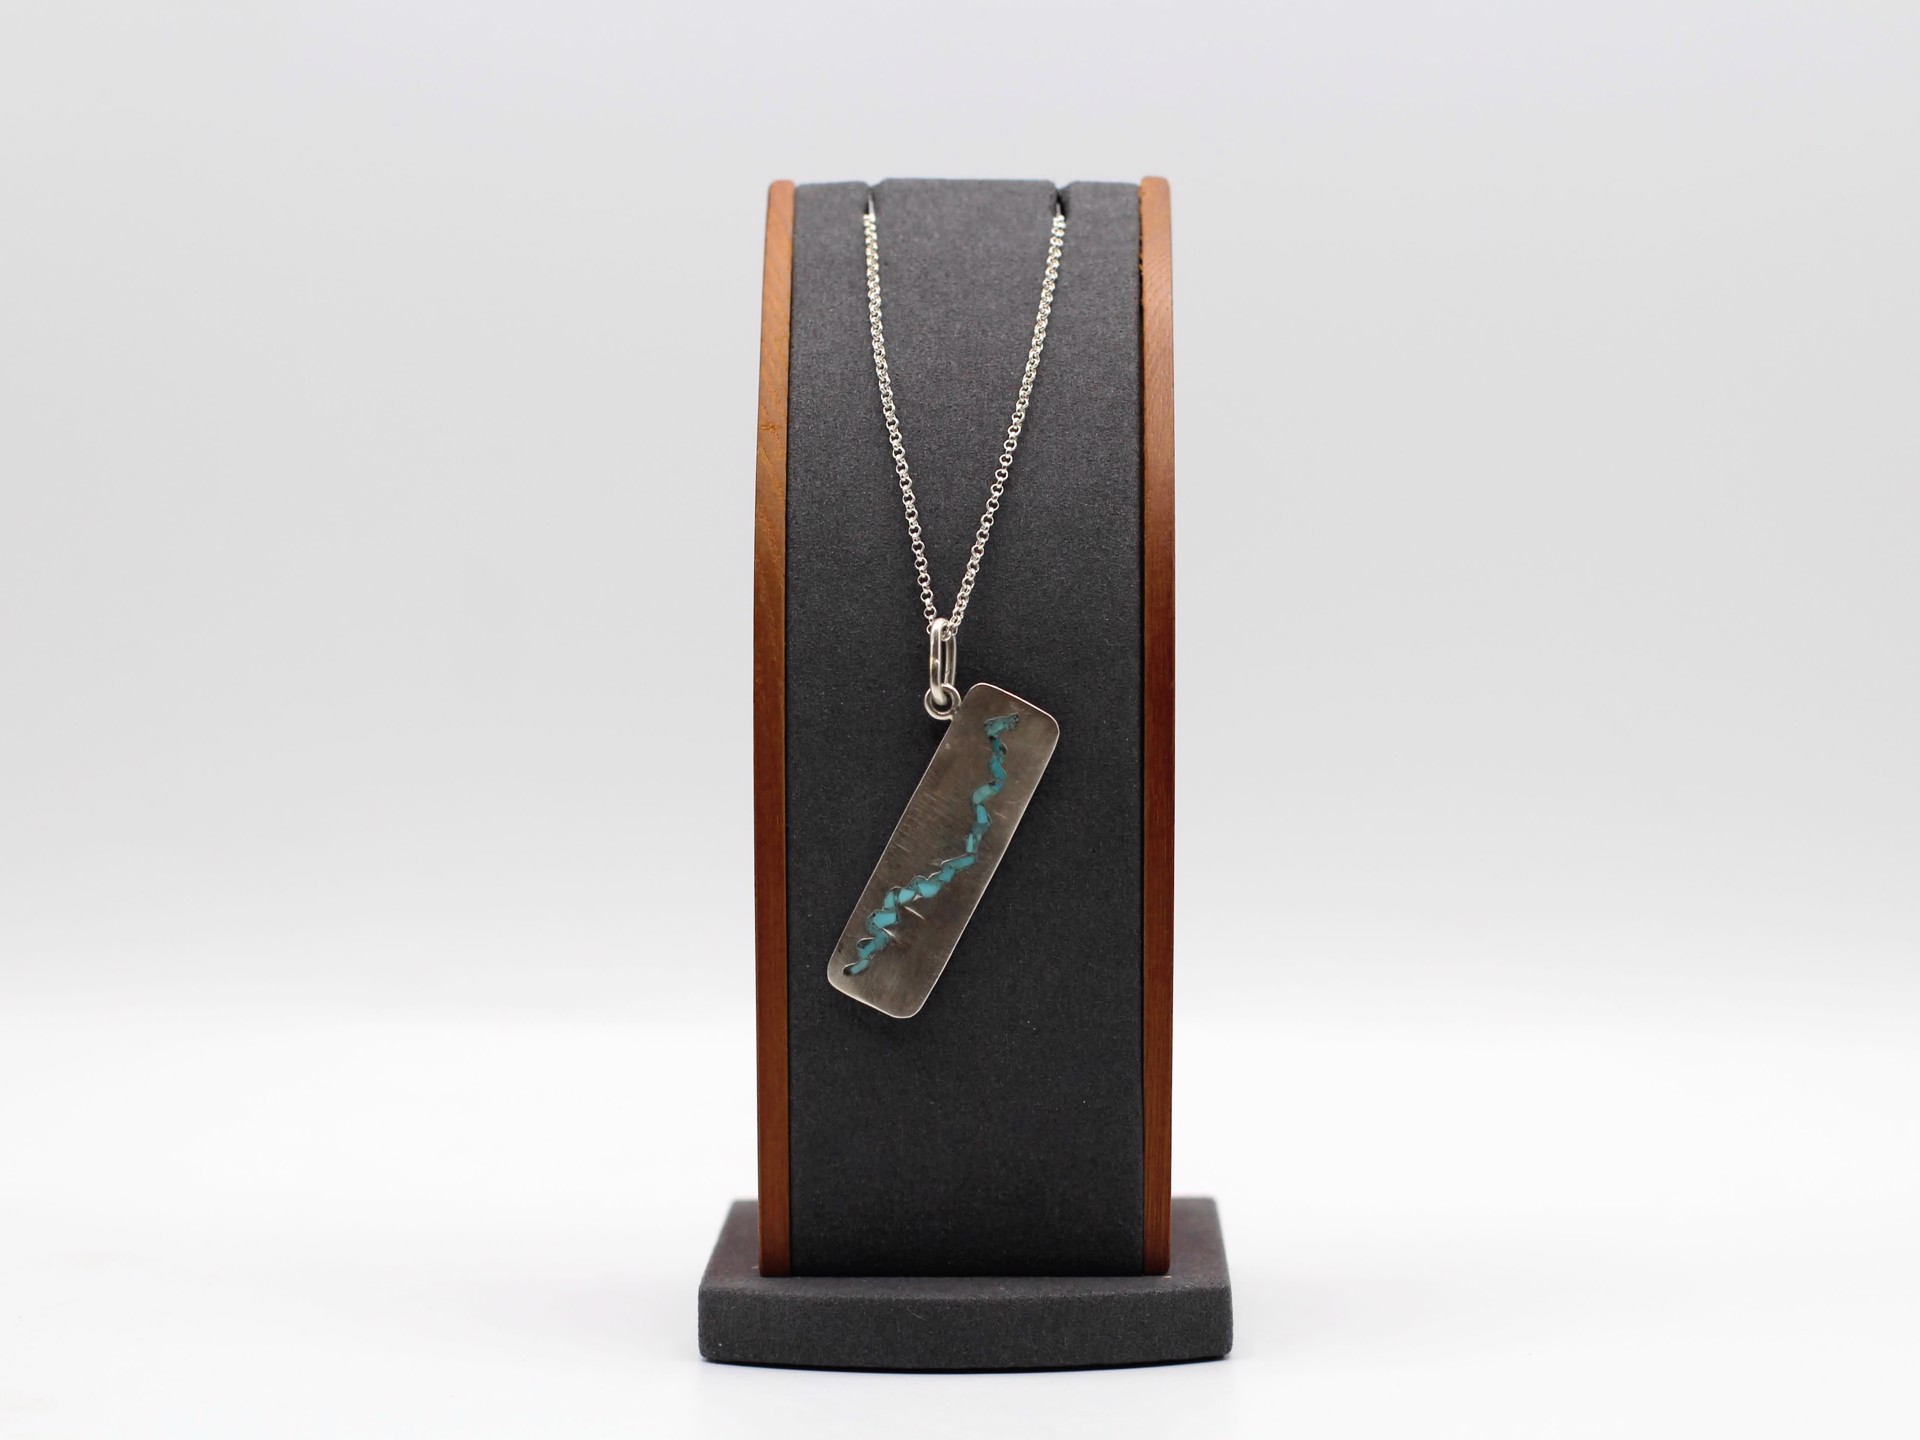 Bitterroot River Bar Necklace by Emily Dubrawski